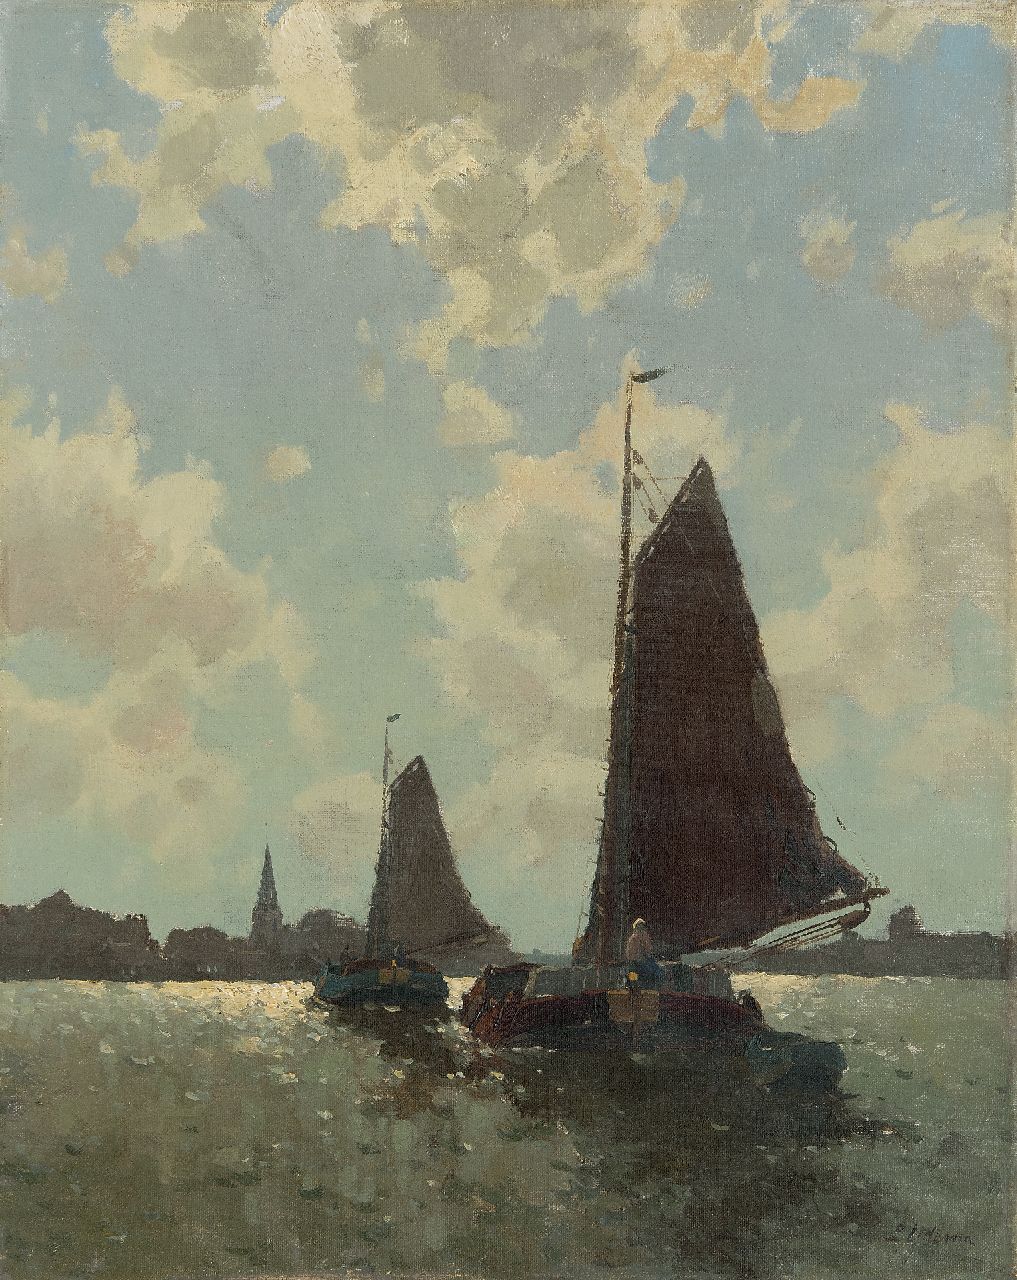 Ydema E.  | Egnatius Ydema, Two barges in backlight near Eernewoude, oil on canvas 50.5 x 40.3 cm, signed l.r.